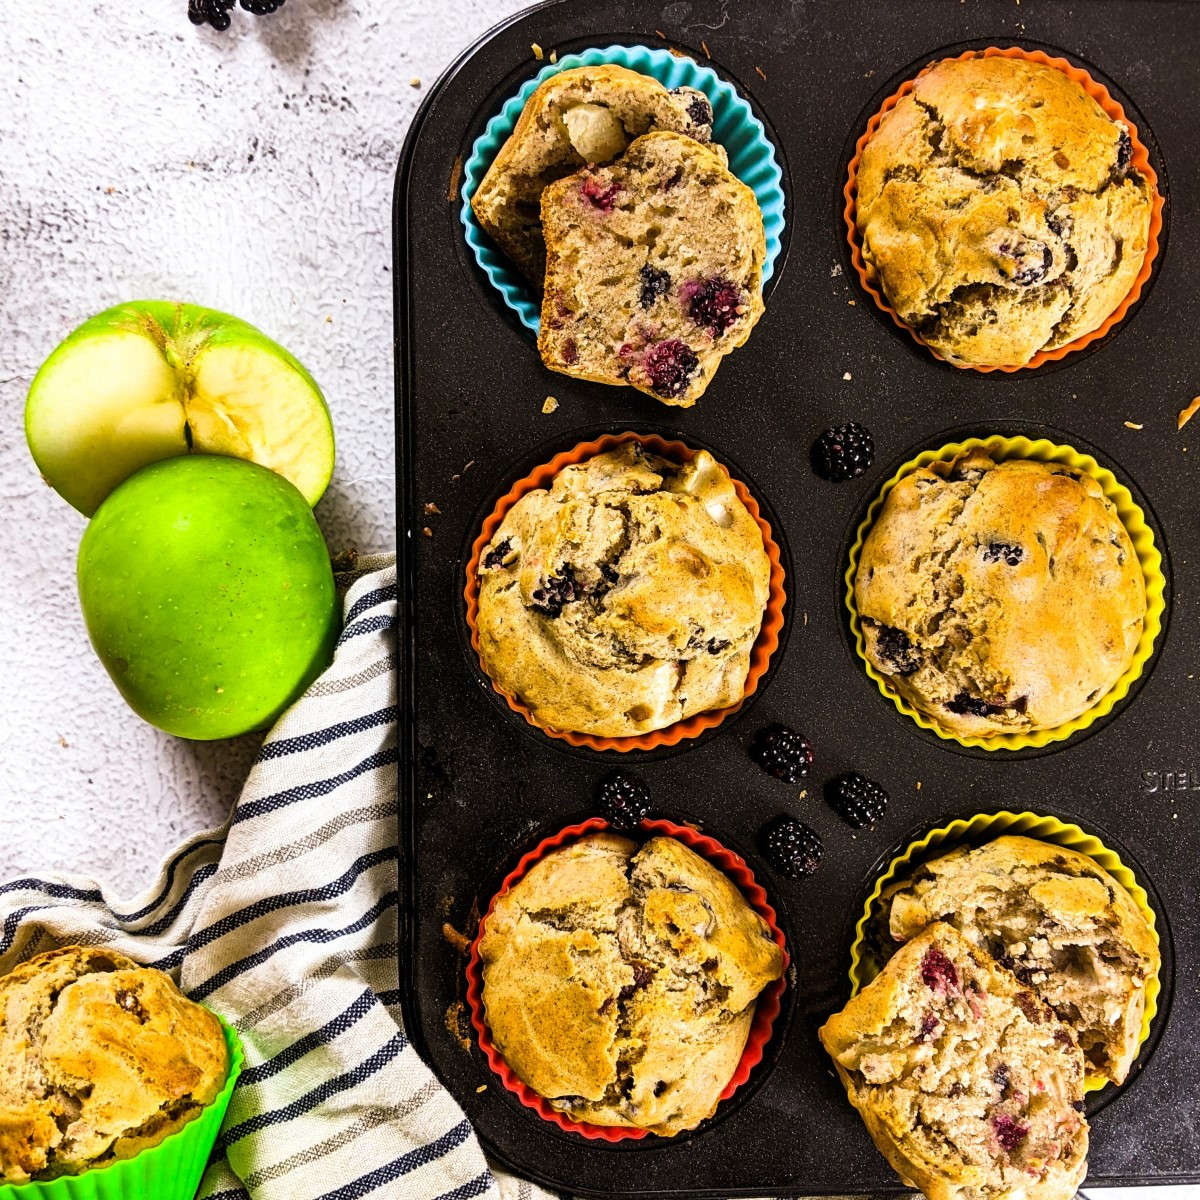 Sugar free blackberry muffins in a baking tray next to blackberries and a green apple.